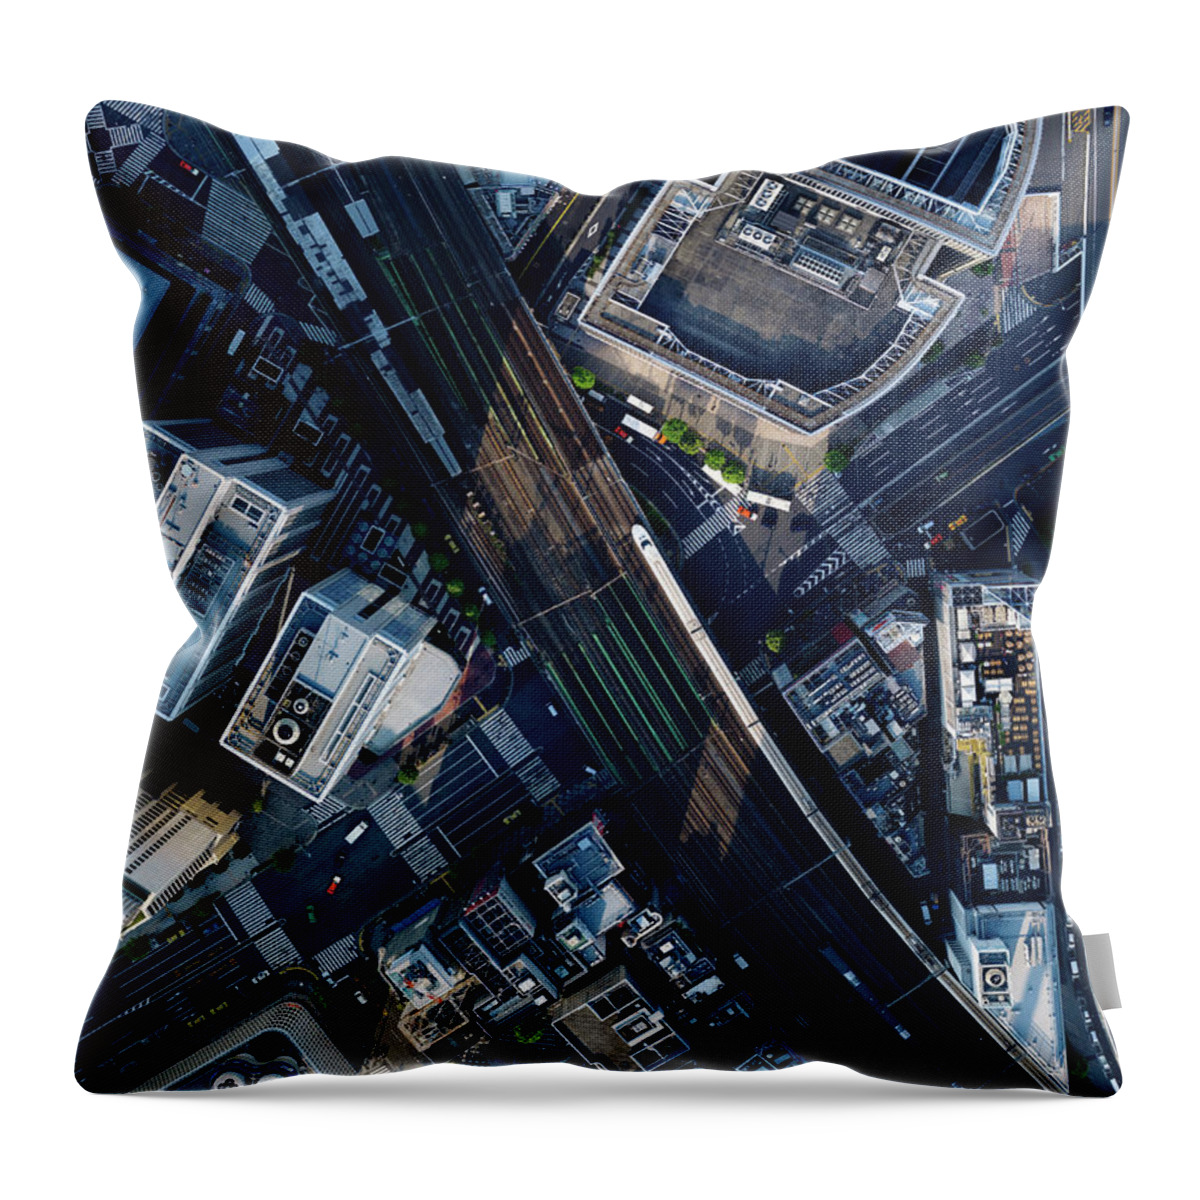 Railroad Track Throw Pillow featuring the photograph Aerial Photography Of Sukiyabashi by Michael H